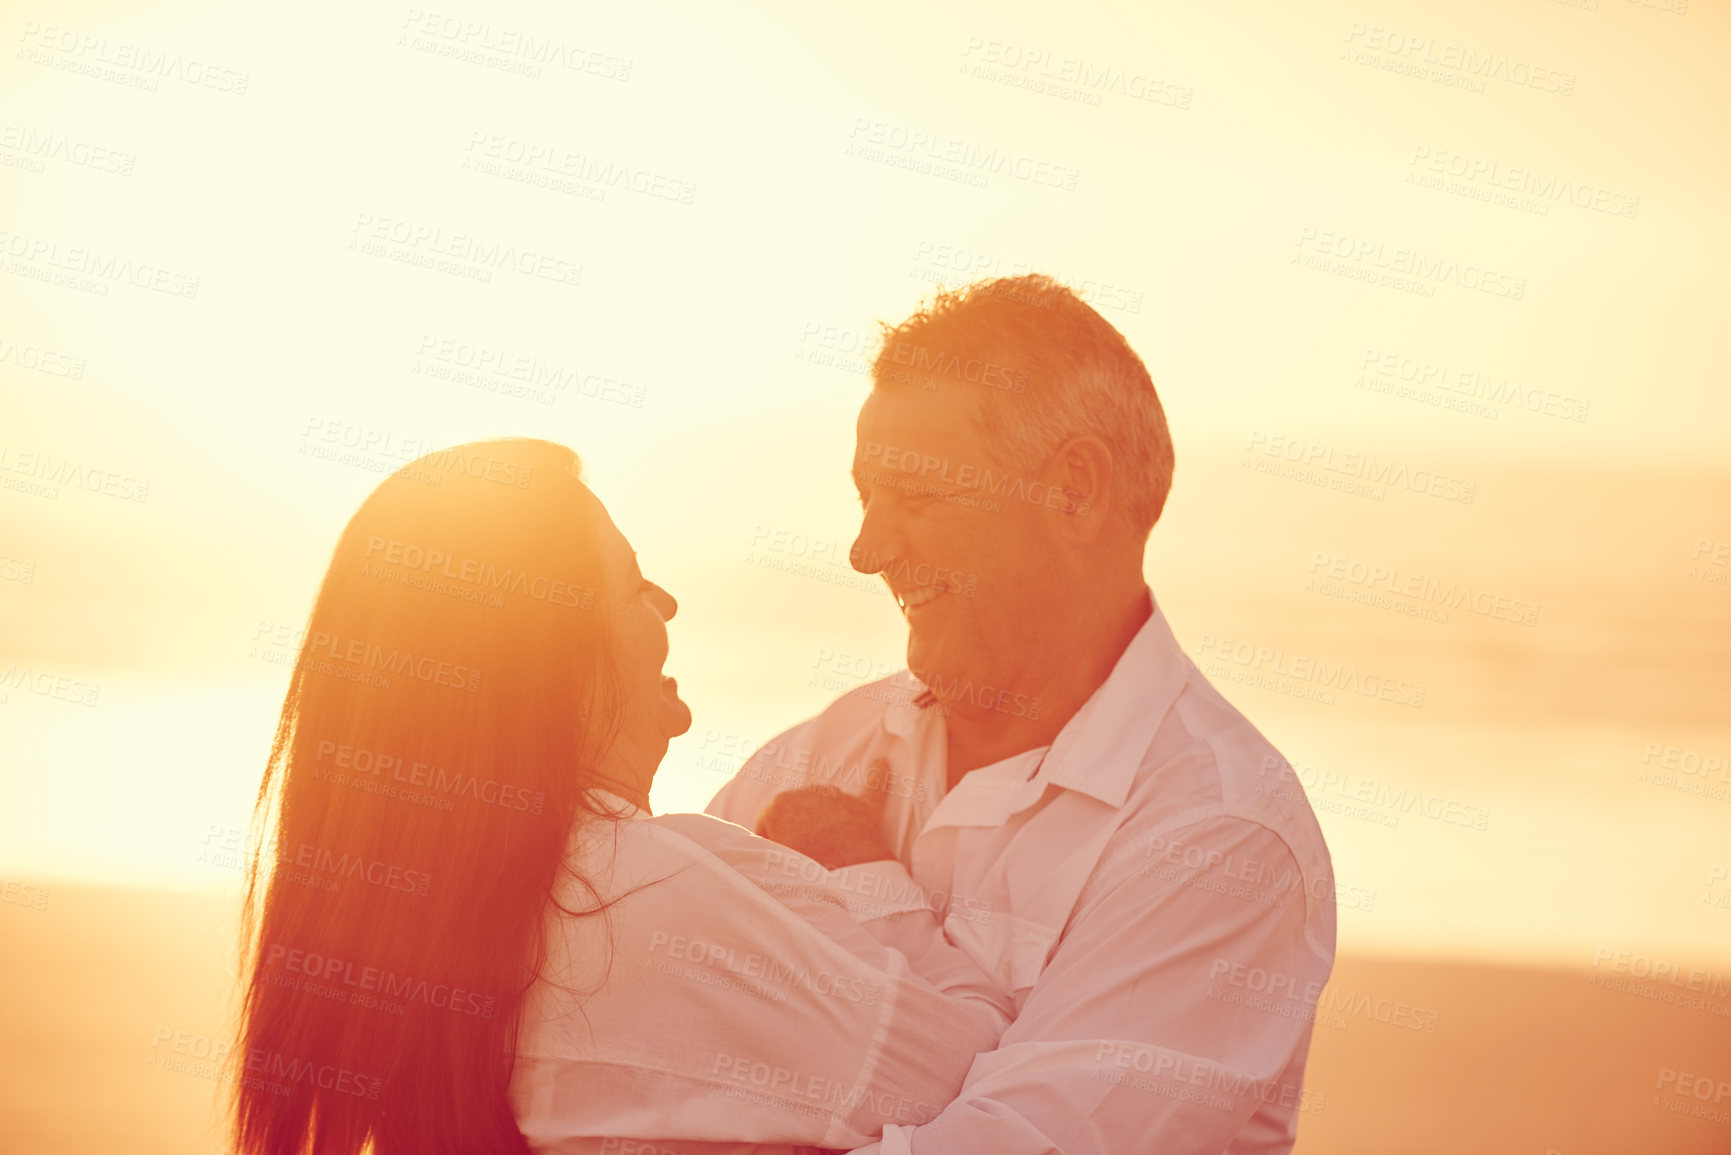 Buy stock photo Cropped shot of an affectionate mature couple embracing on the beach at sunset